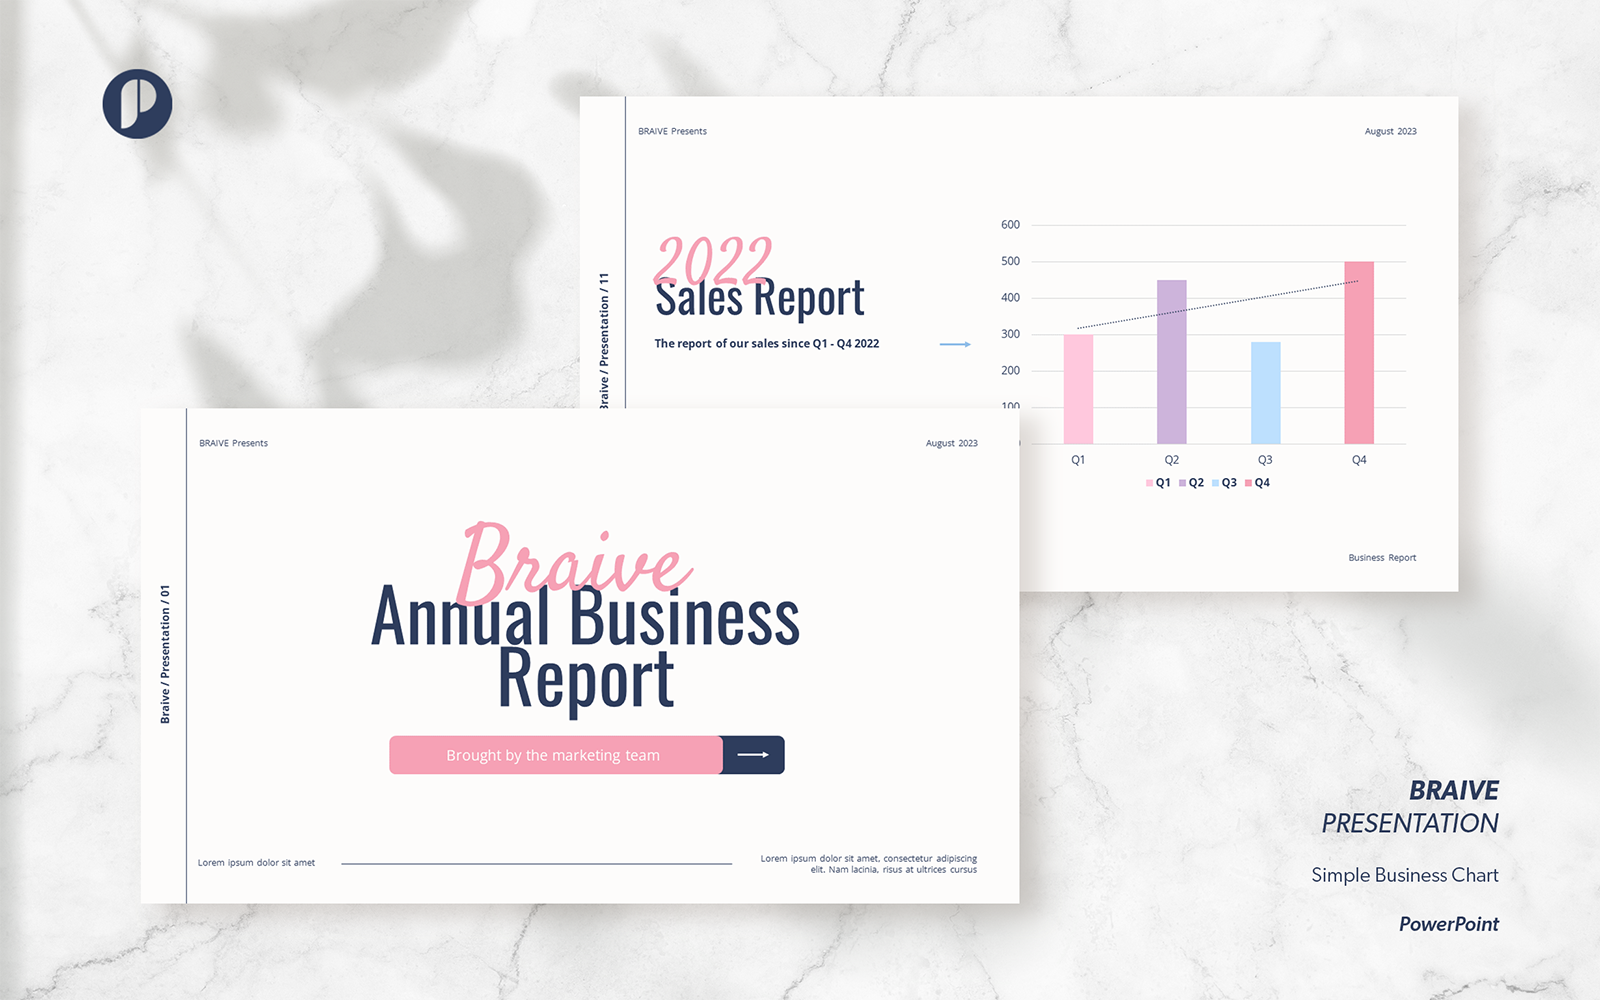 Braive – baby pink navy simple business chart presentation